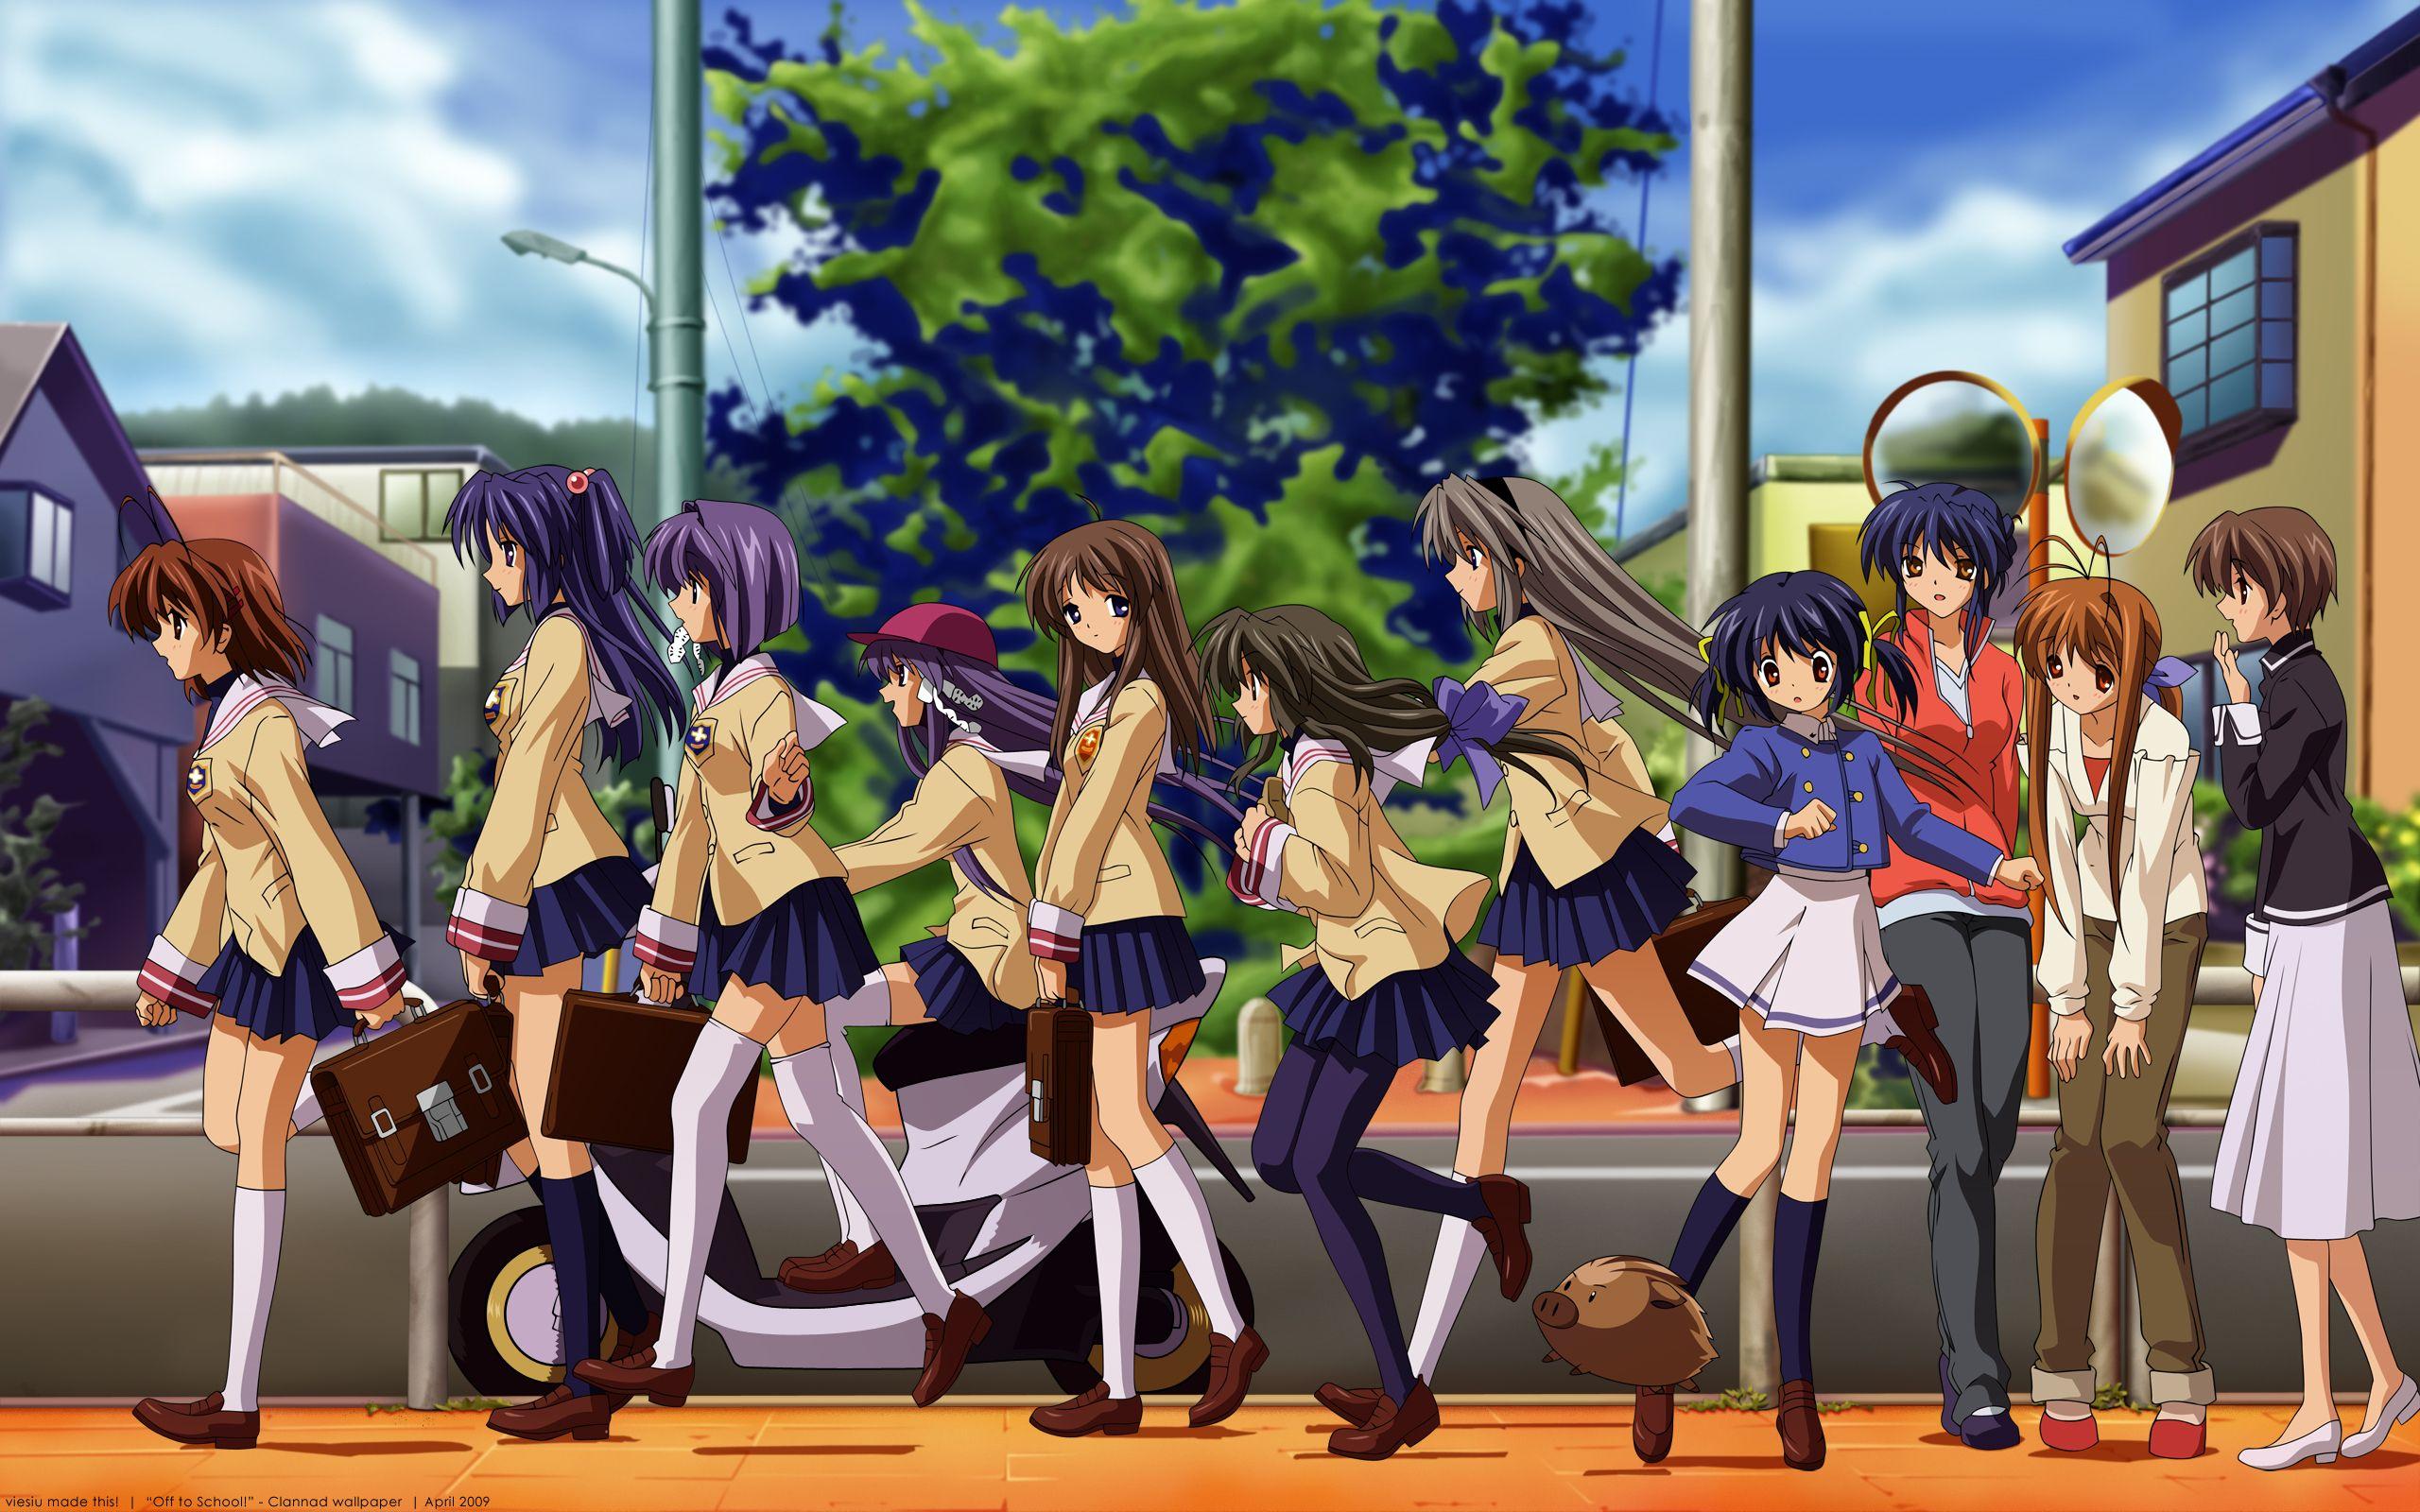 Clannad Review